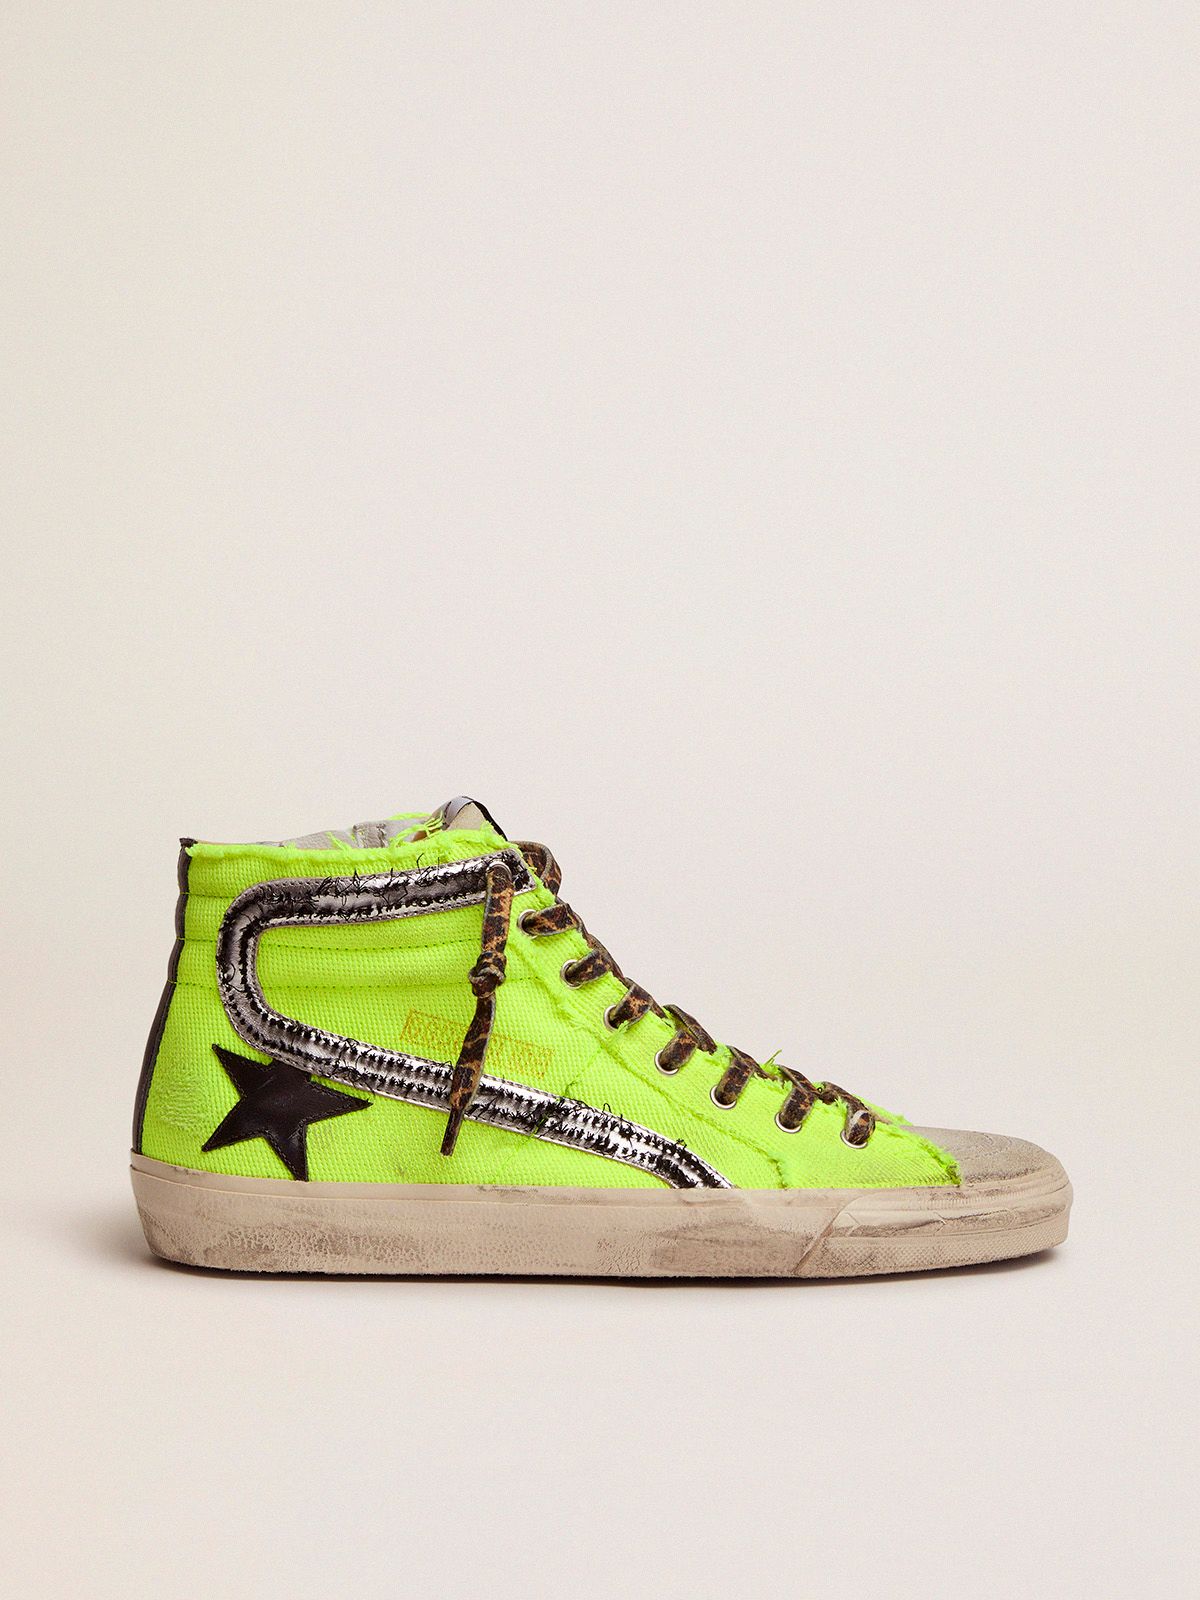 golden goose sneakers canvas black in Collection yellow Slide Maker star with fluorescent Dream